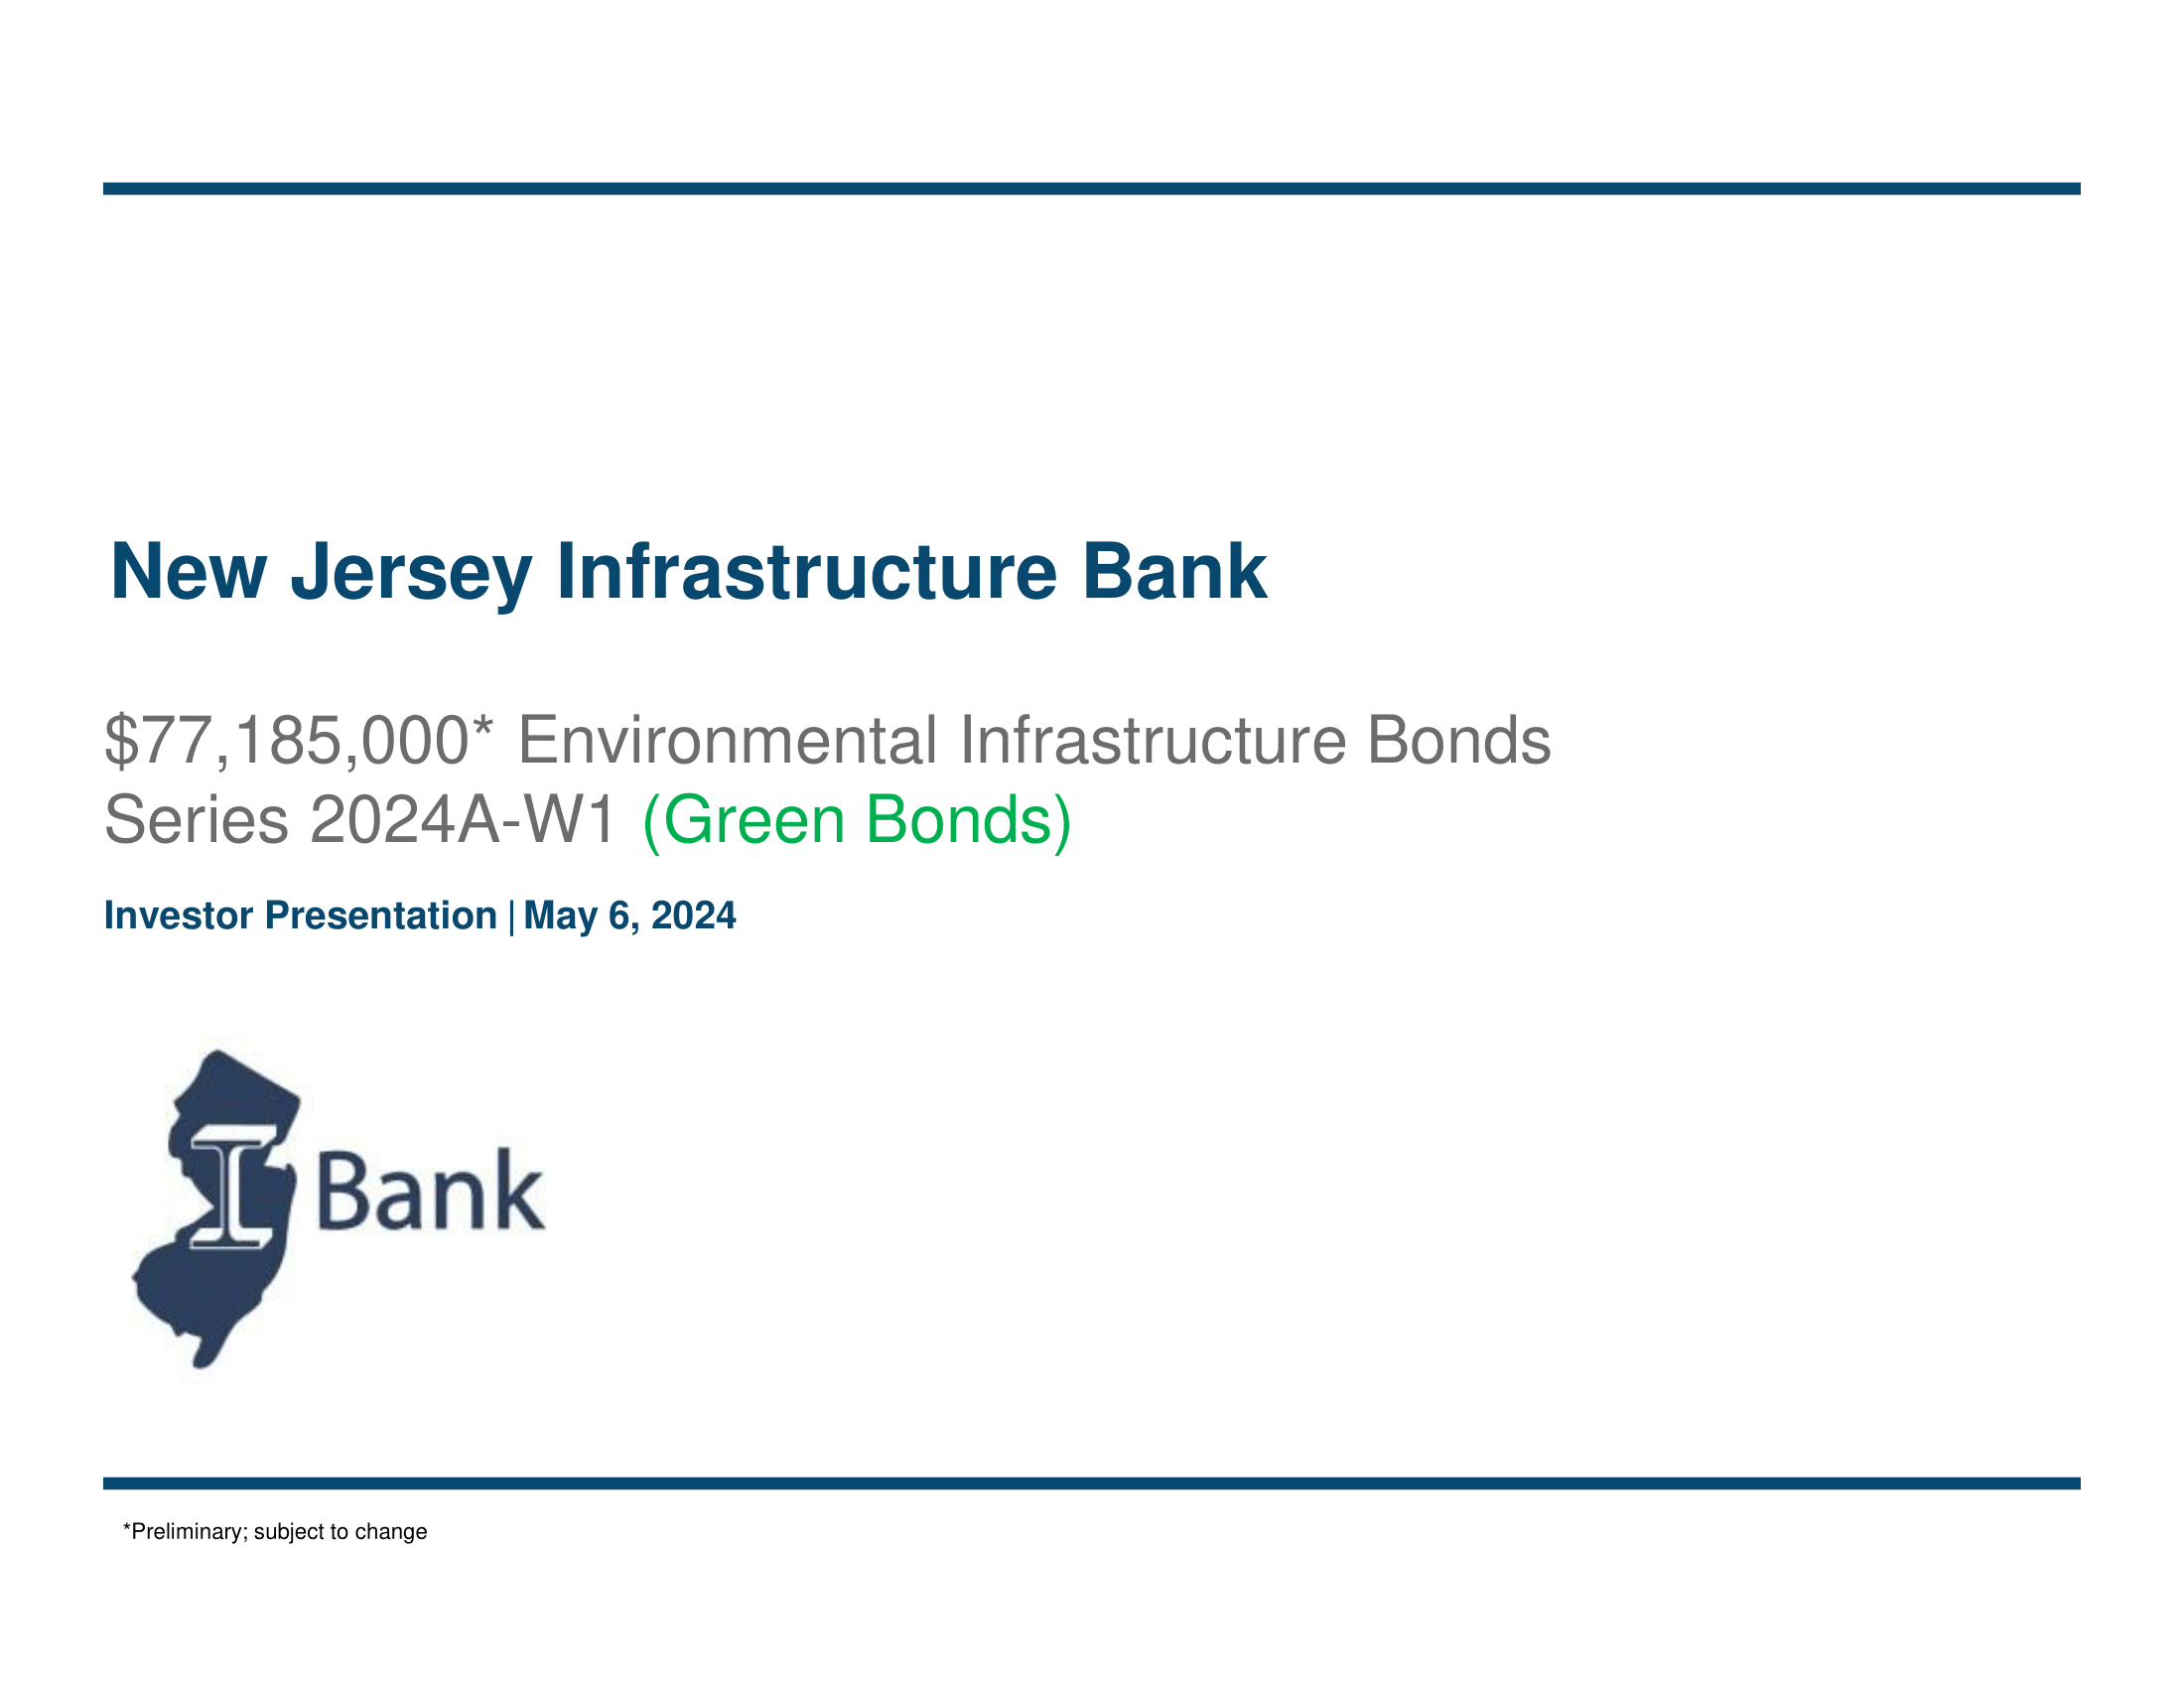 Roadshow for New Jersey Infrastructure Bank